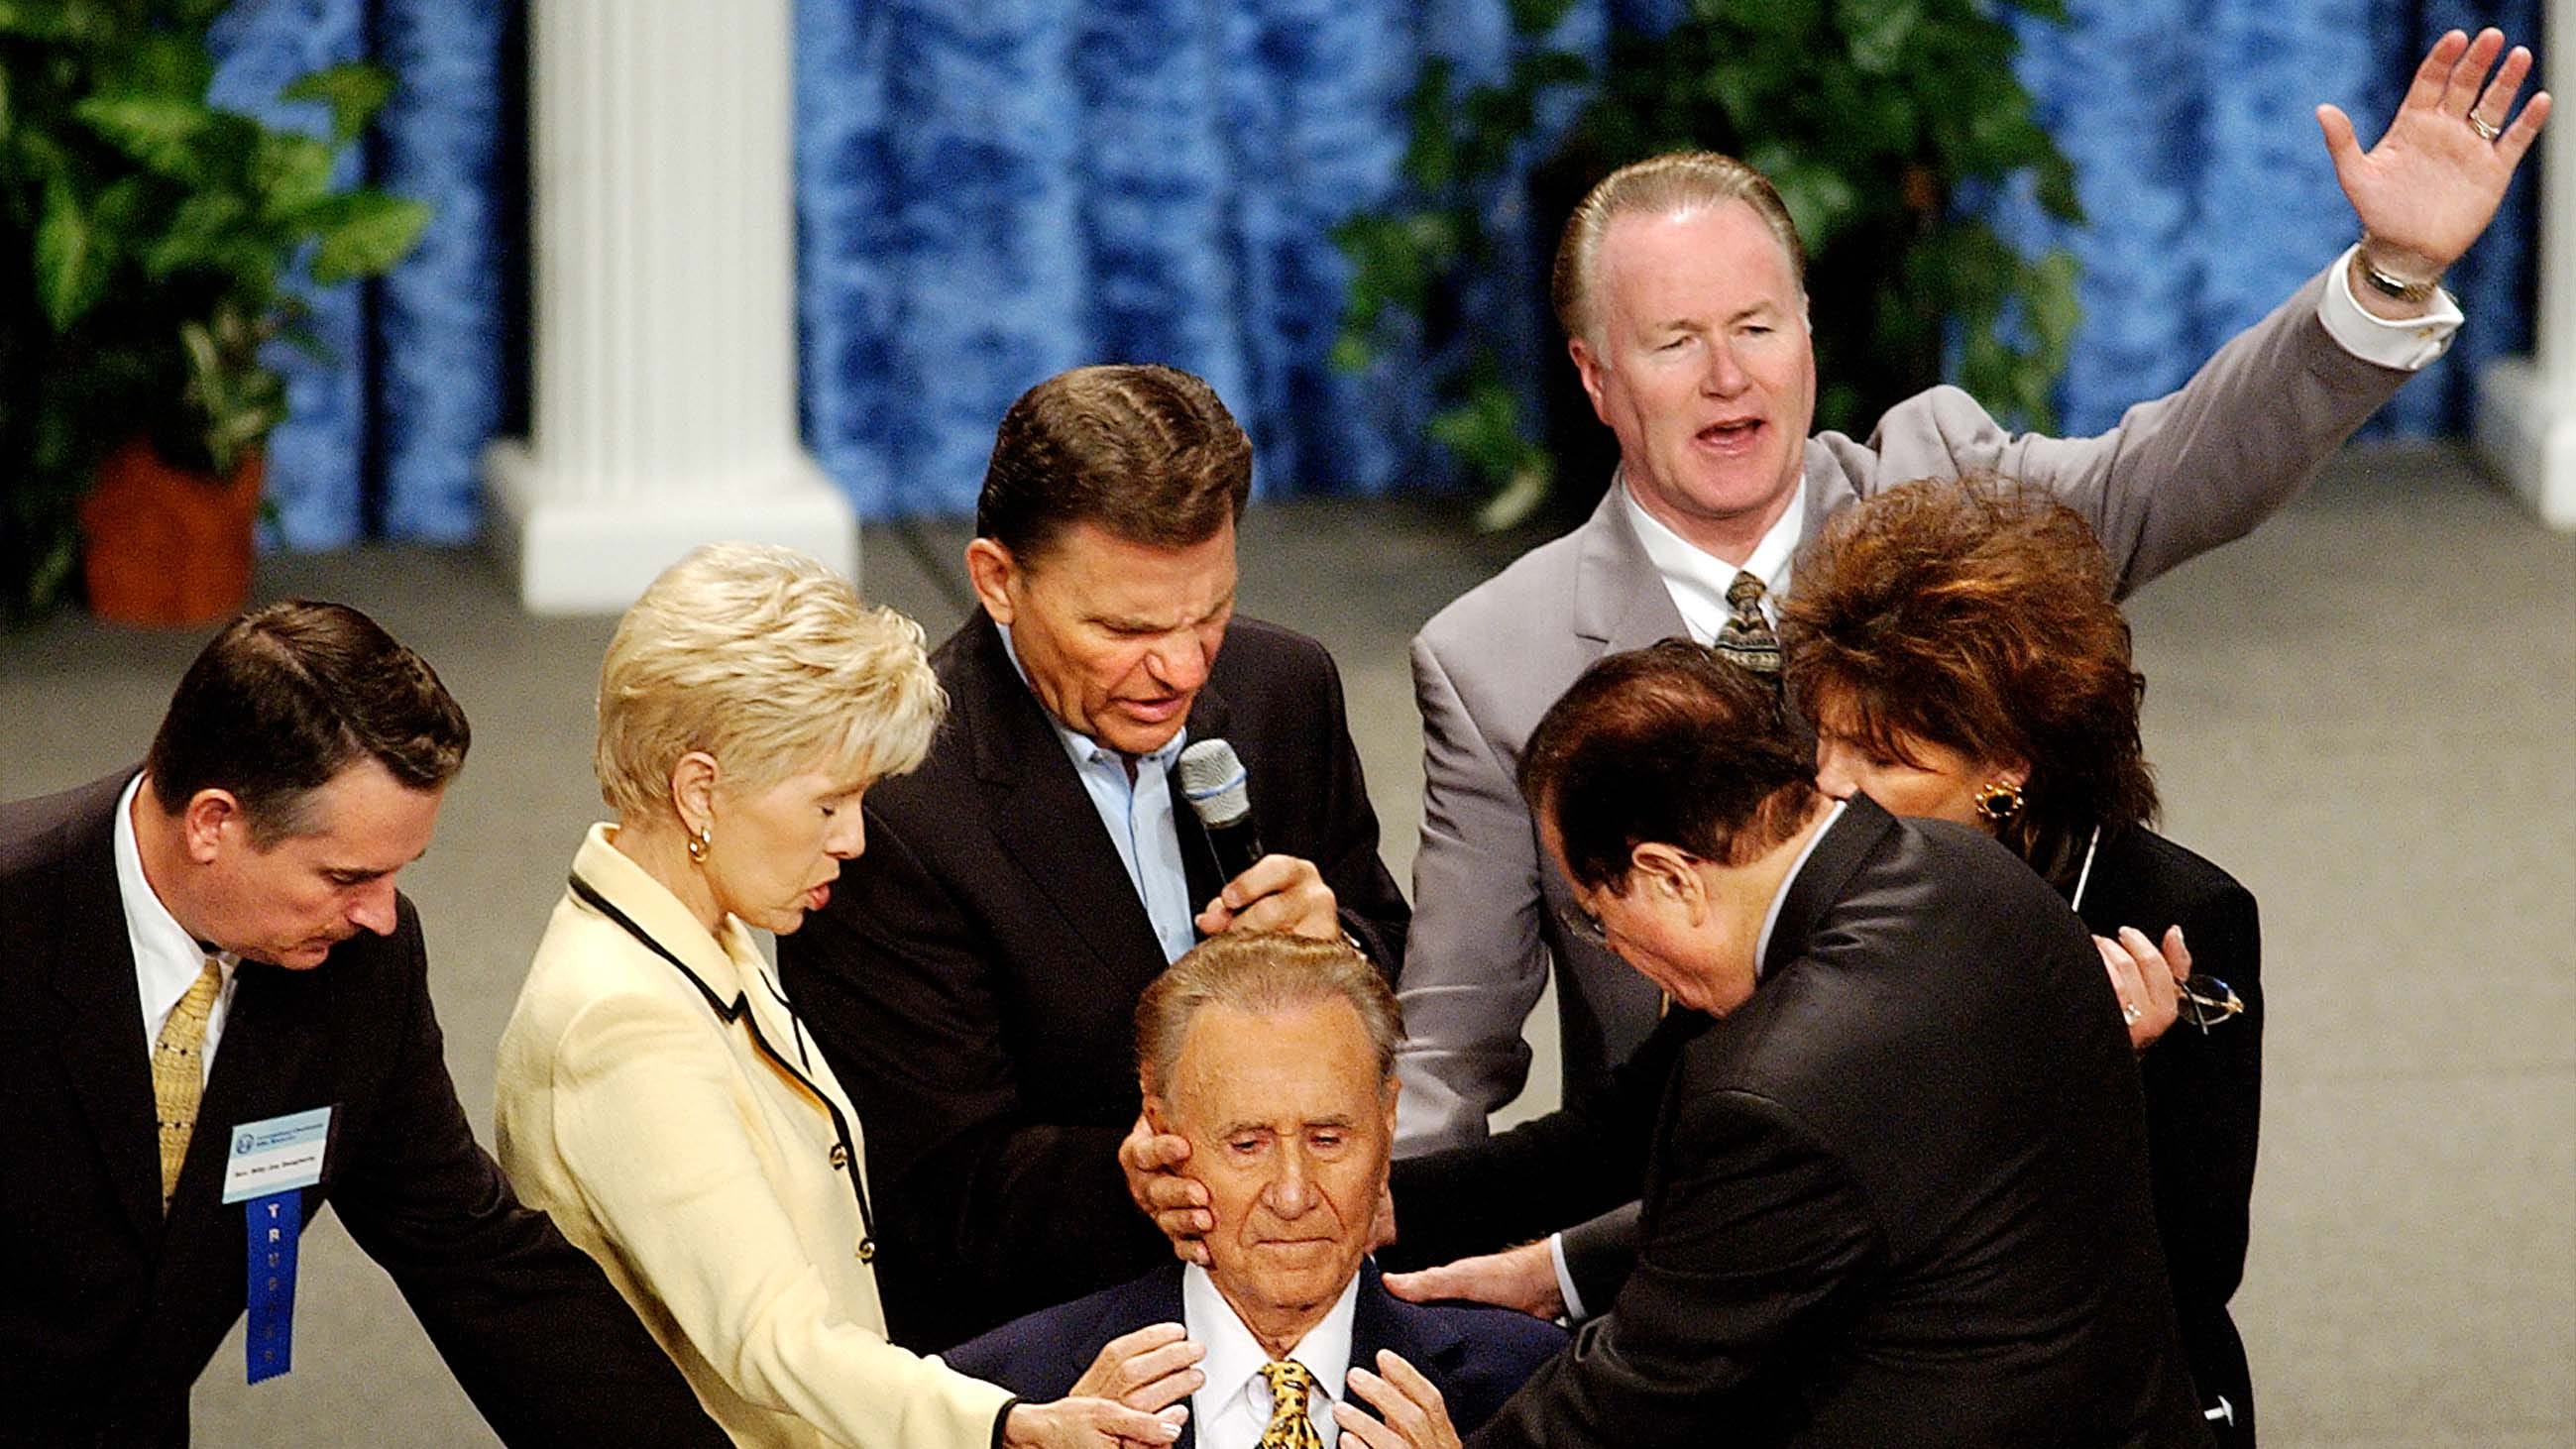 Joel Osteen, Copelands among 10 televangelists who face controversy